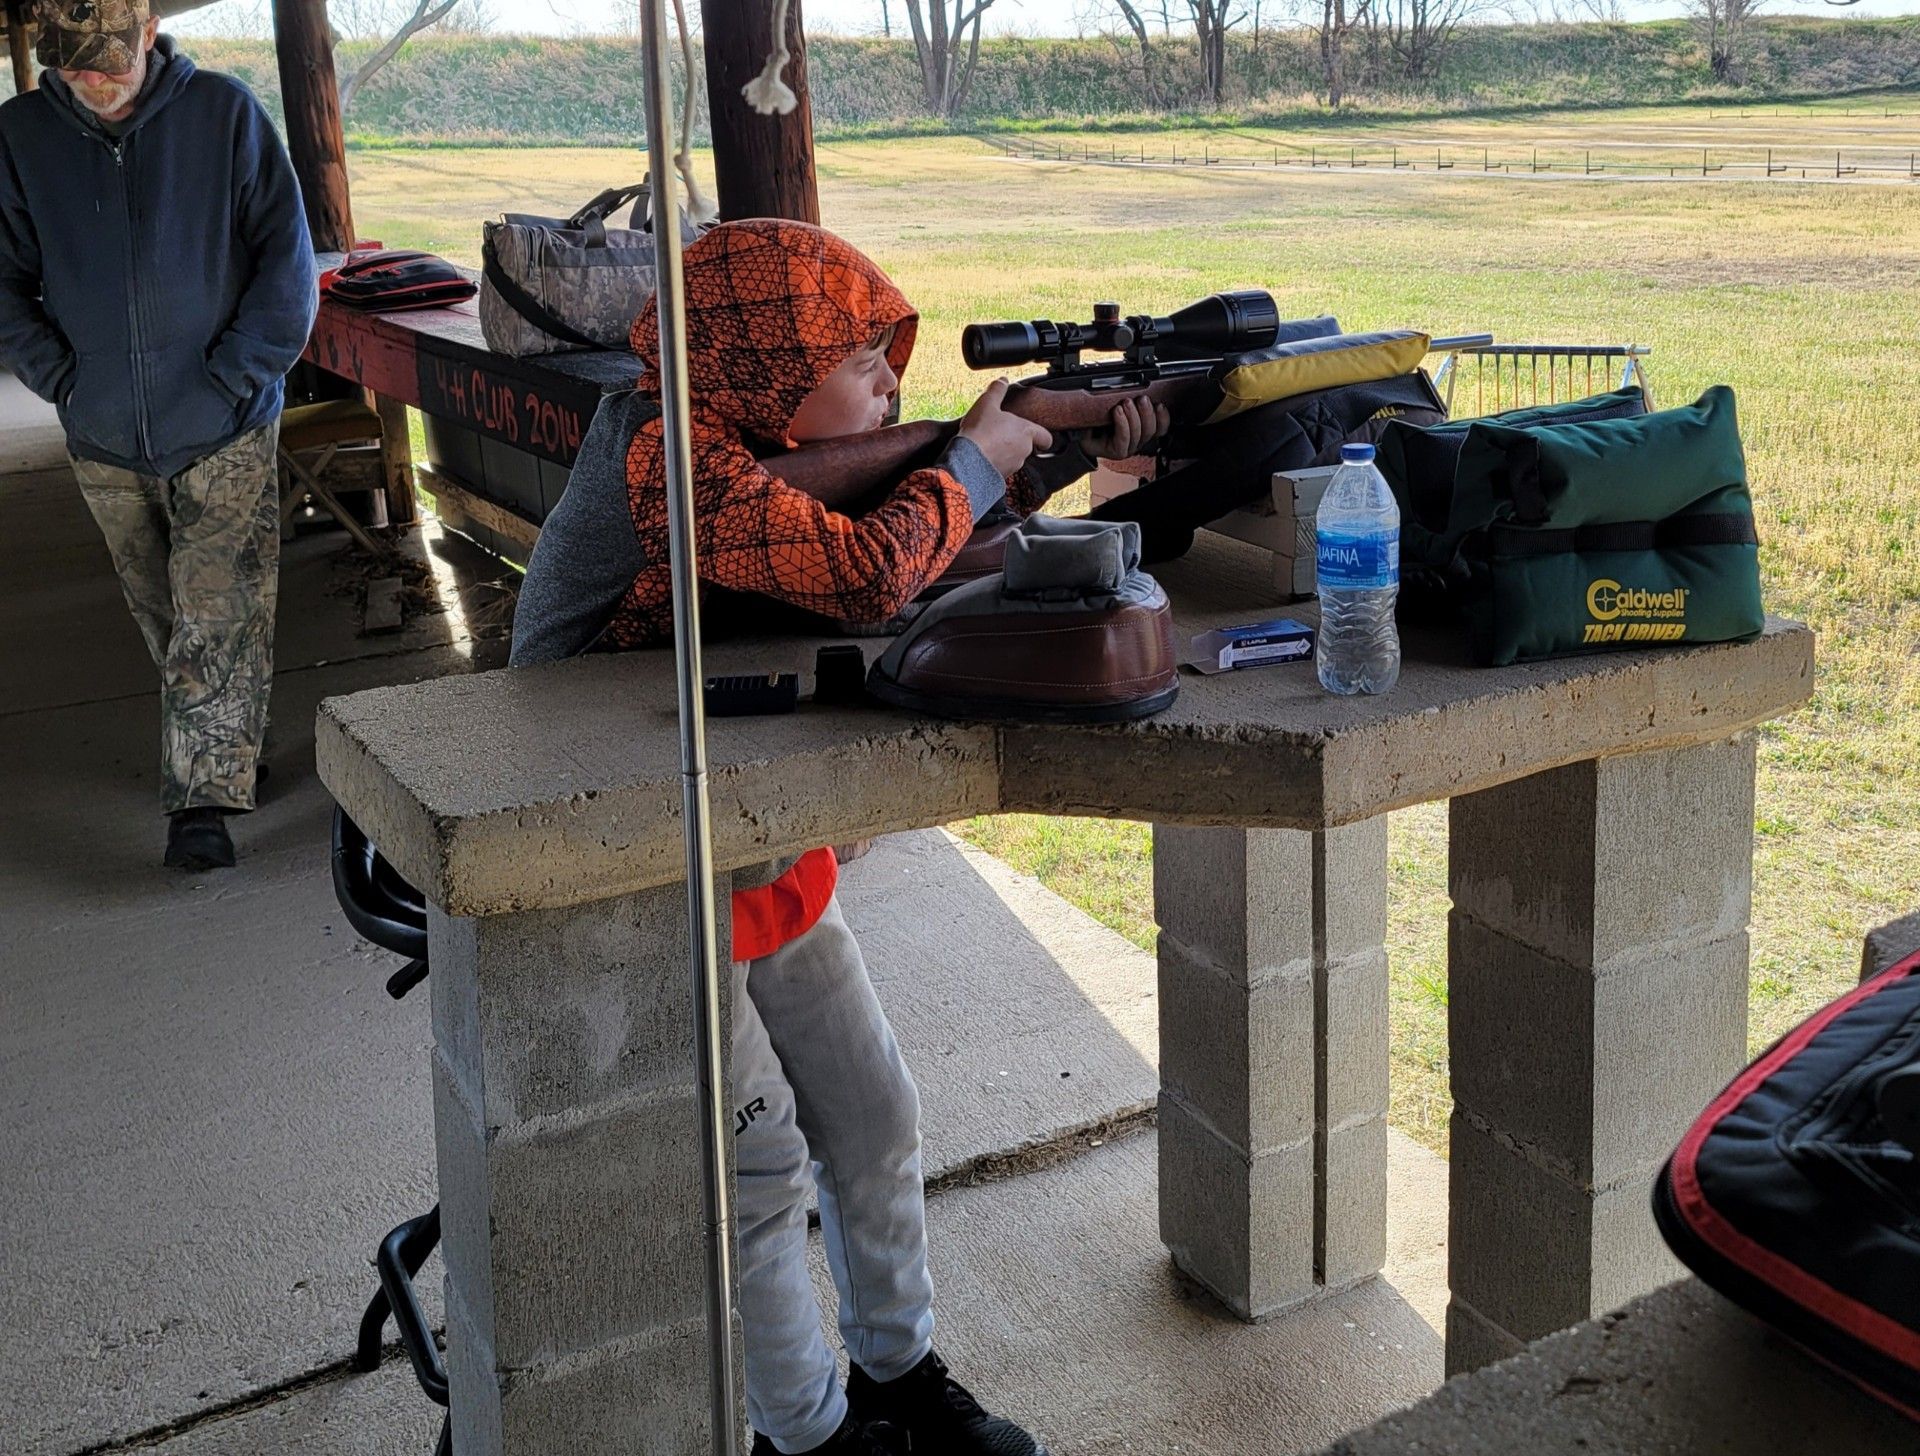 young boy taking aim with a rifle at gun range table